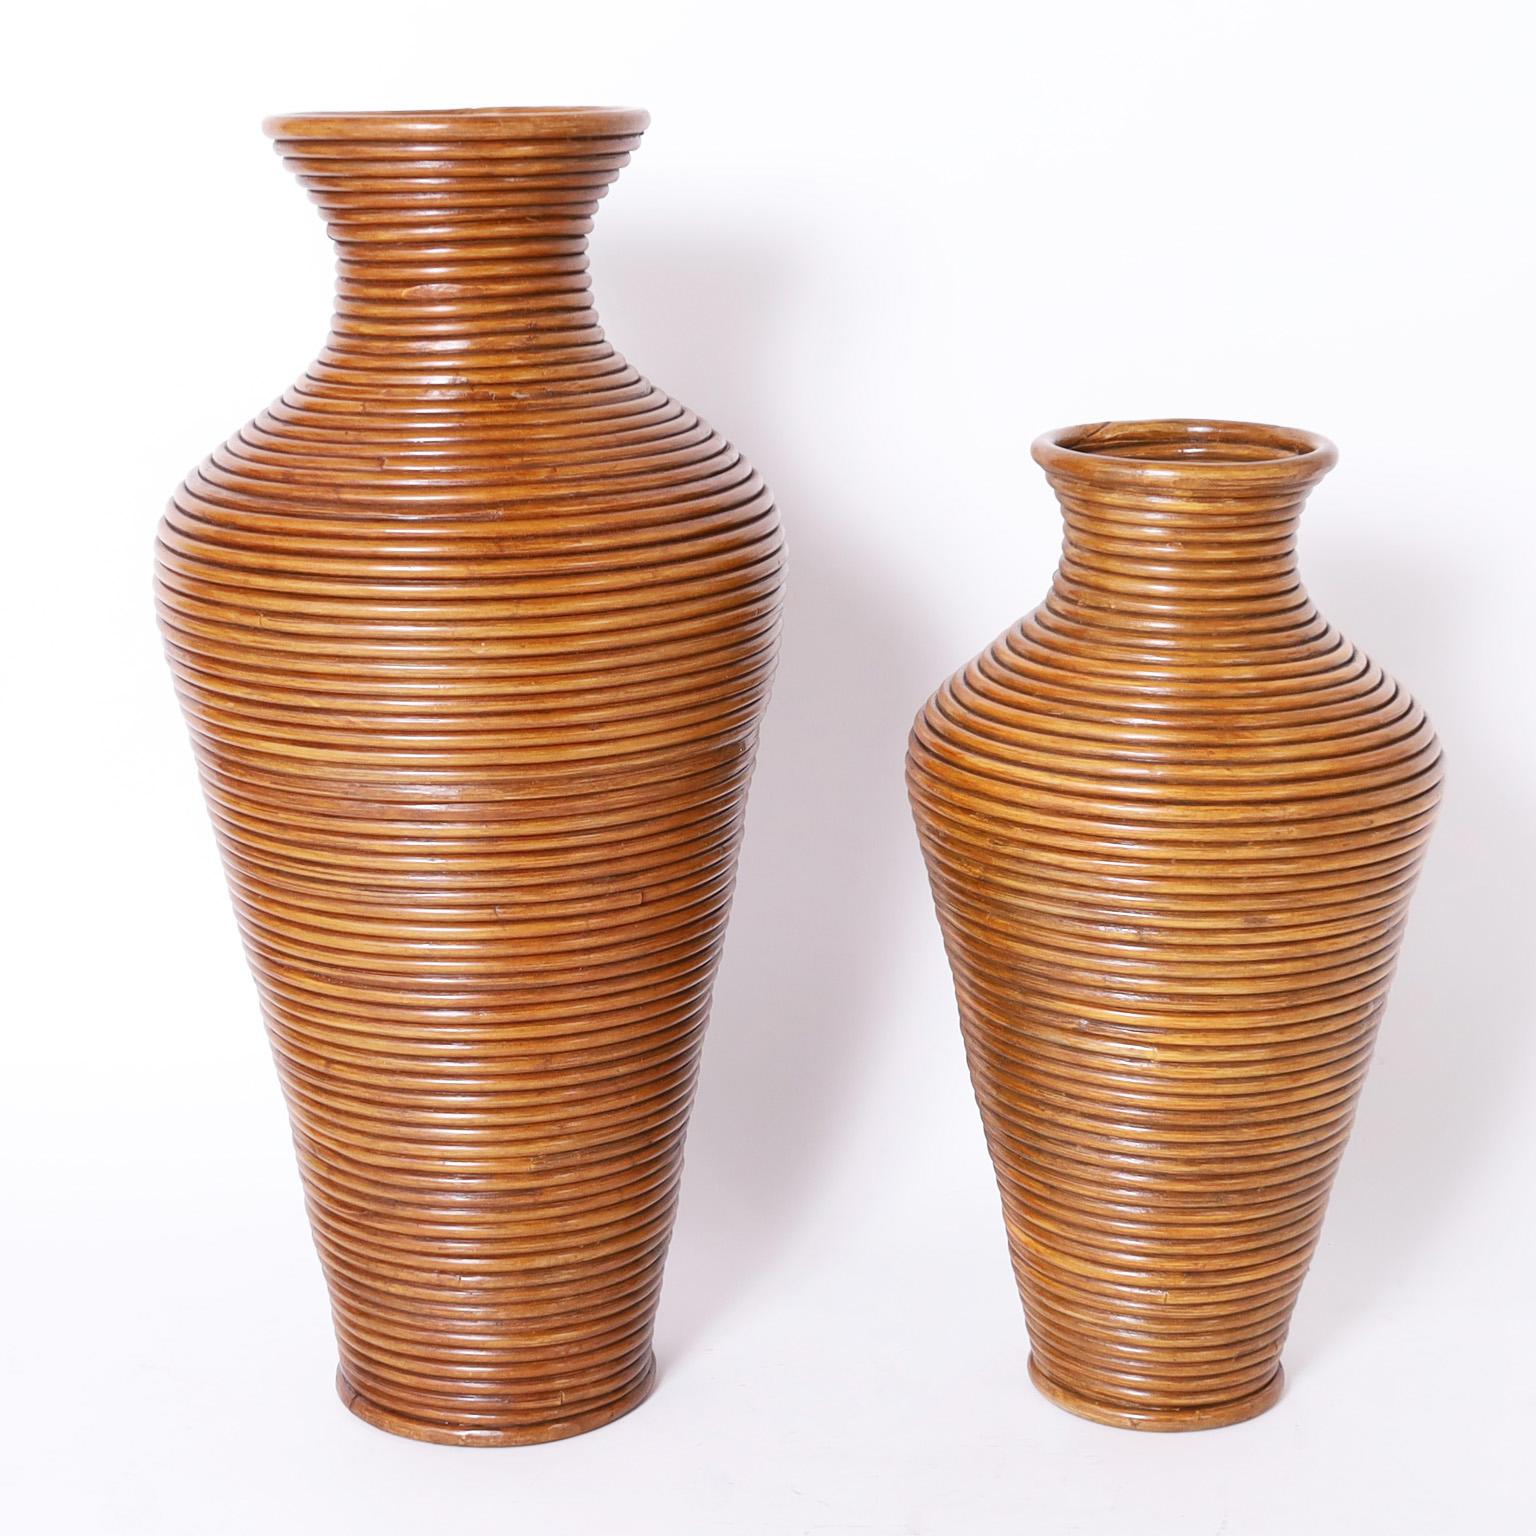 Two chic mid-century floor vases or urns crafted in pencil reed in classic modern form. Priced individually.

Taller vase: H: 36 DM: 16 $2,250.00

Shorter vase: H: 27 DM: 14 $1,500.00.